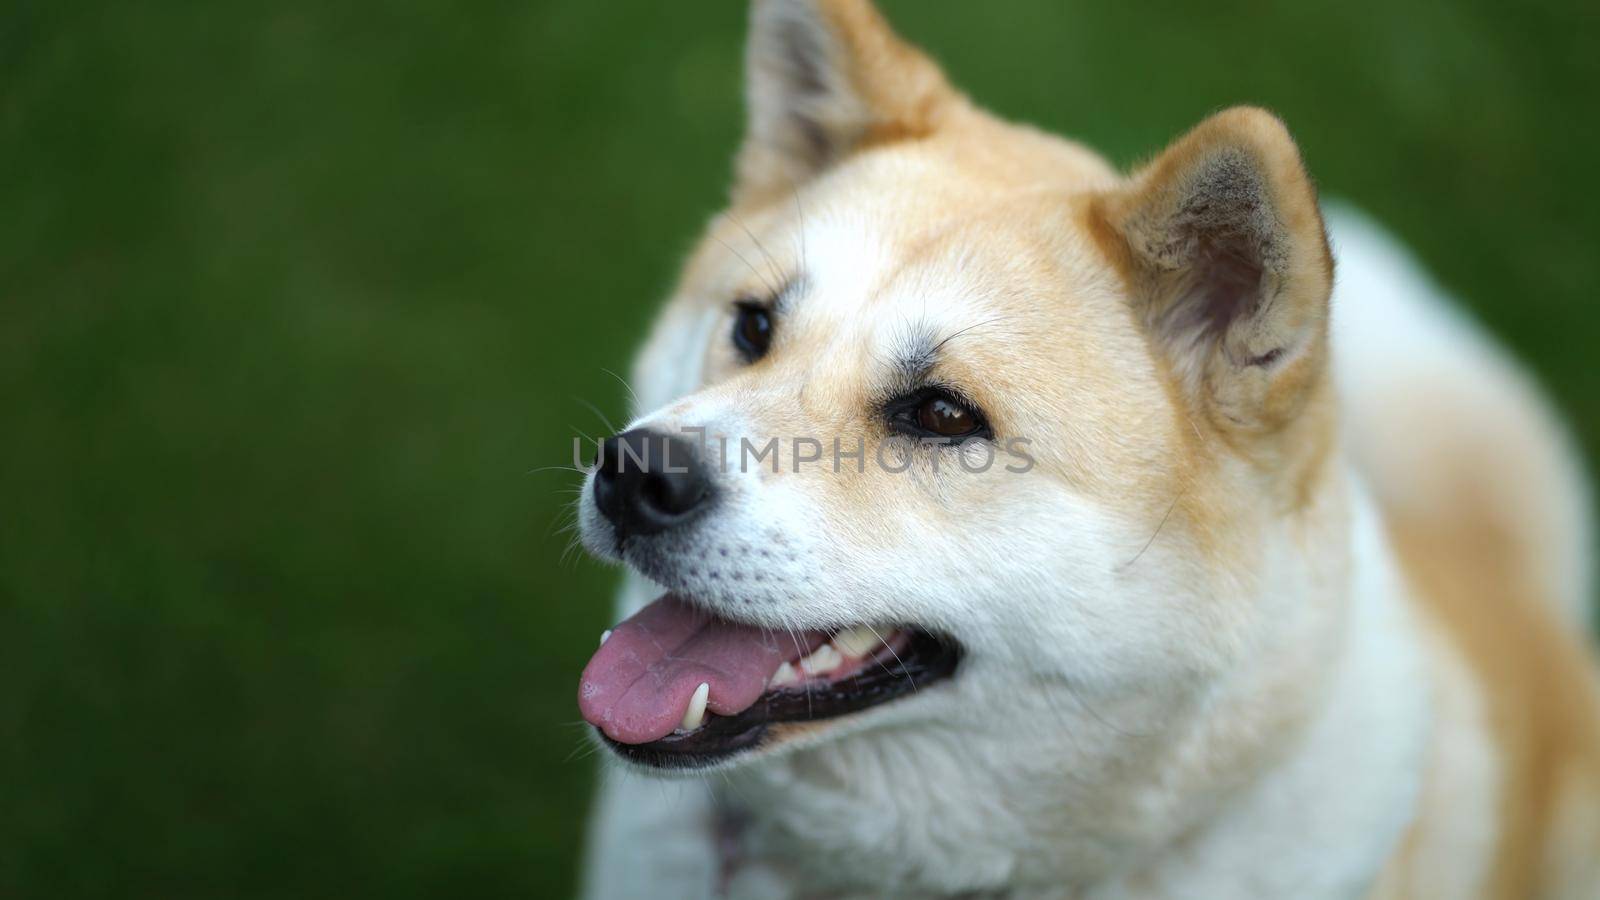 Muzzle of an Akita Inu dog close-up on a background of a green lawn. The dog sticks out its tongue and breathes through an open mouth. by Petrokill